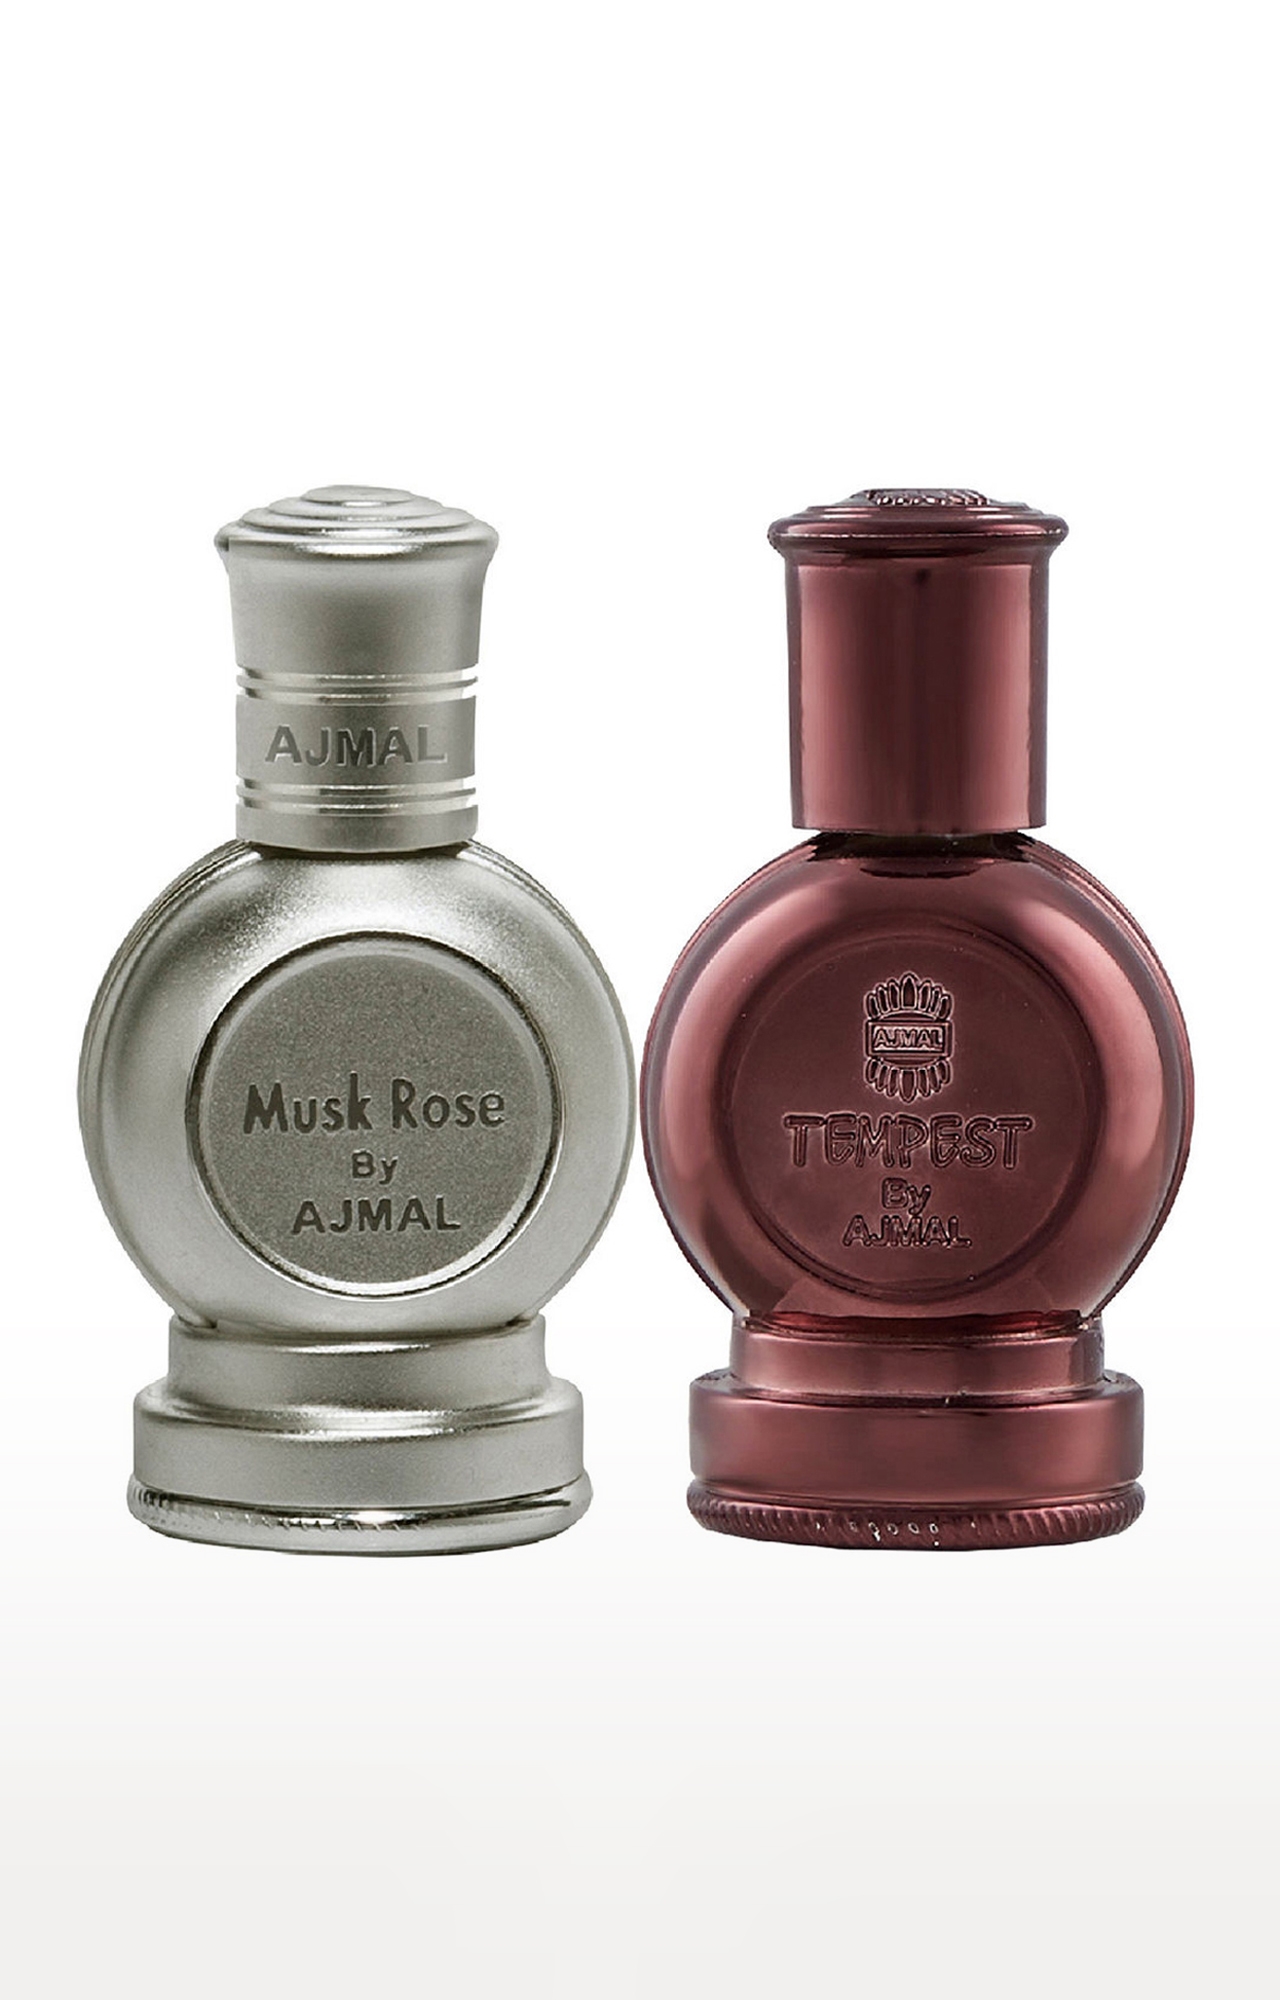 Ajmal | Ajmal Musk Rose Concentrated Perfume Oil Floral Musky Alcohol- Attar 12Ml For Unisex And Tempest Concentrated Perfume Oil Floral Alcohol- Attar 12Ml For Unisex